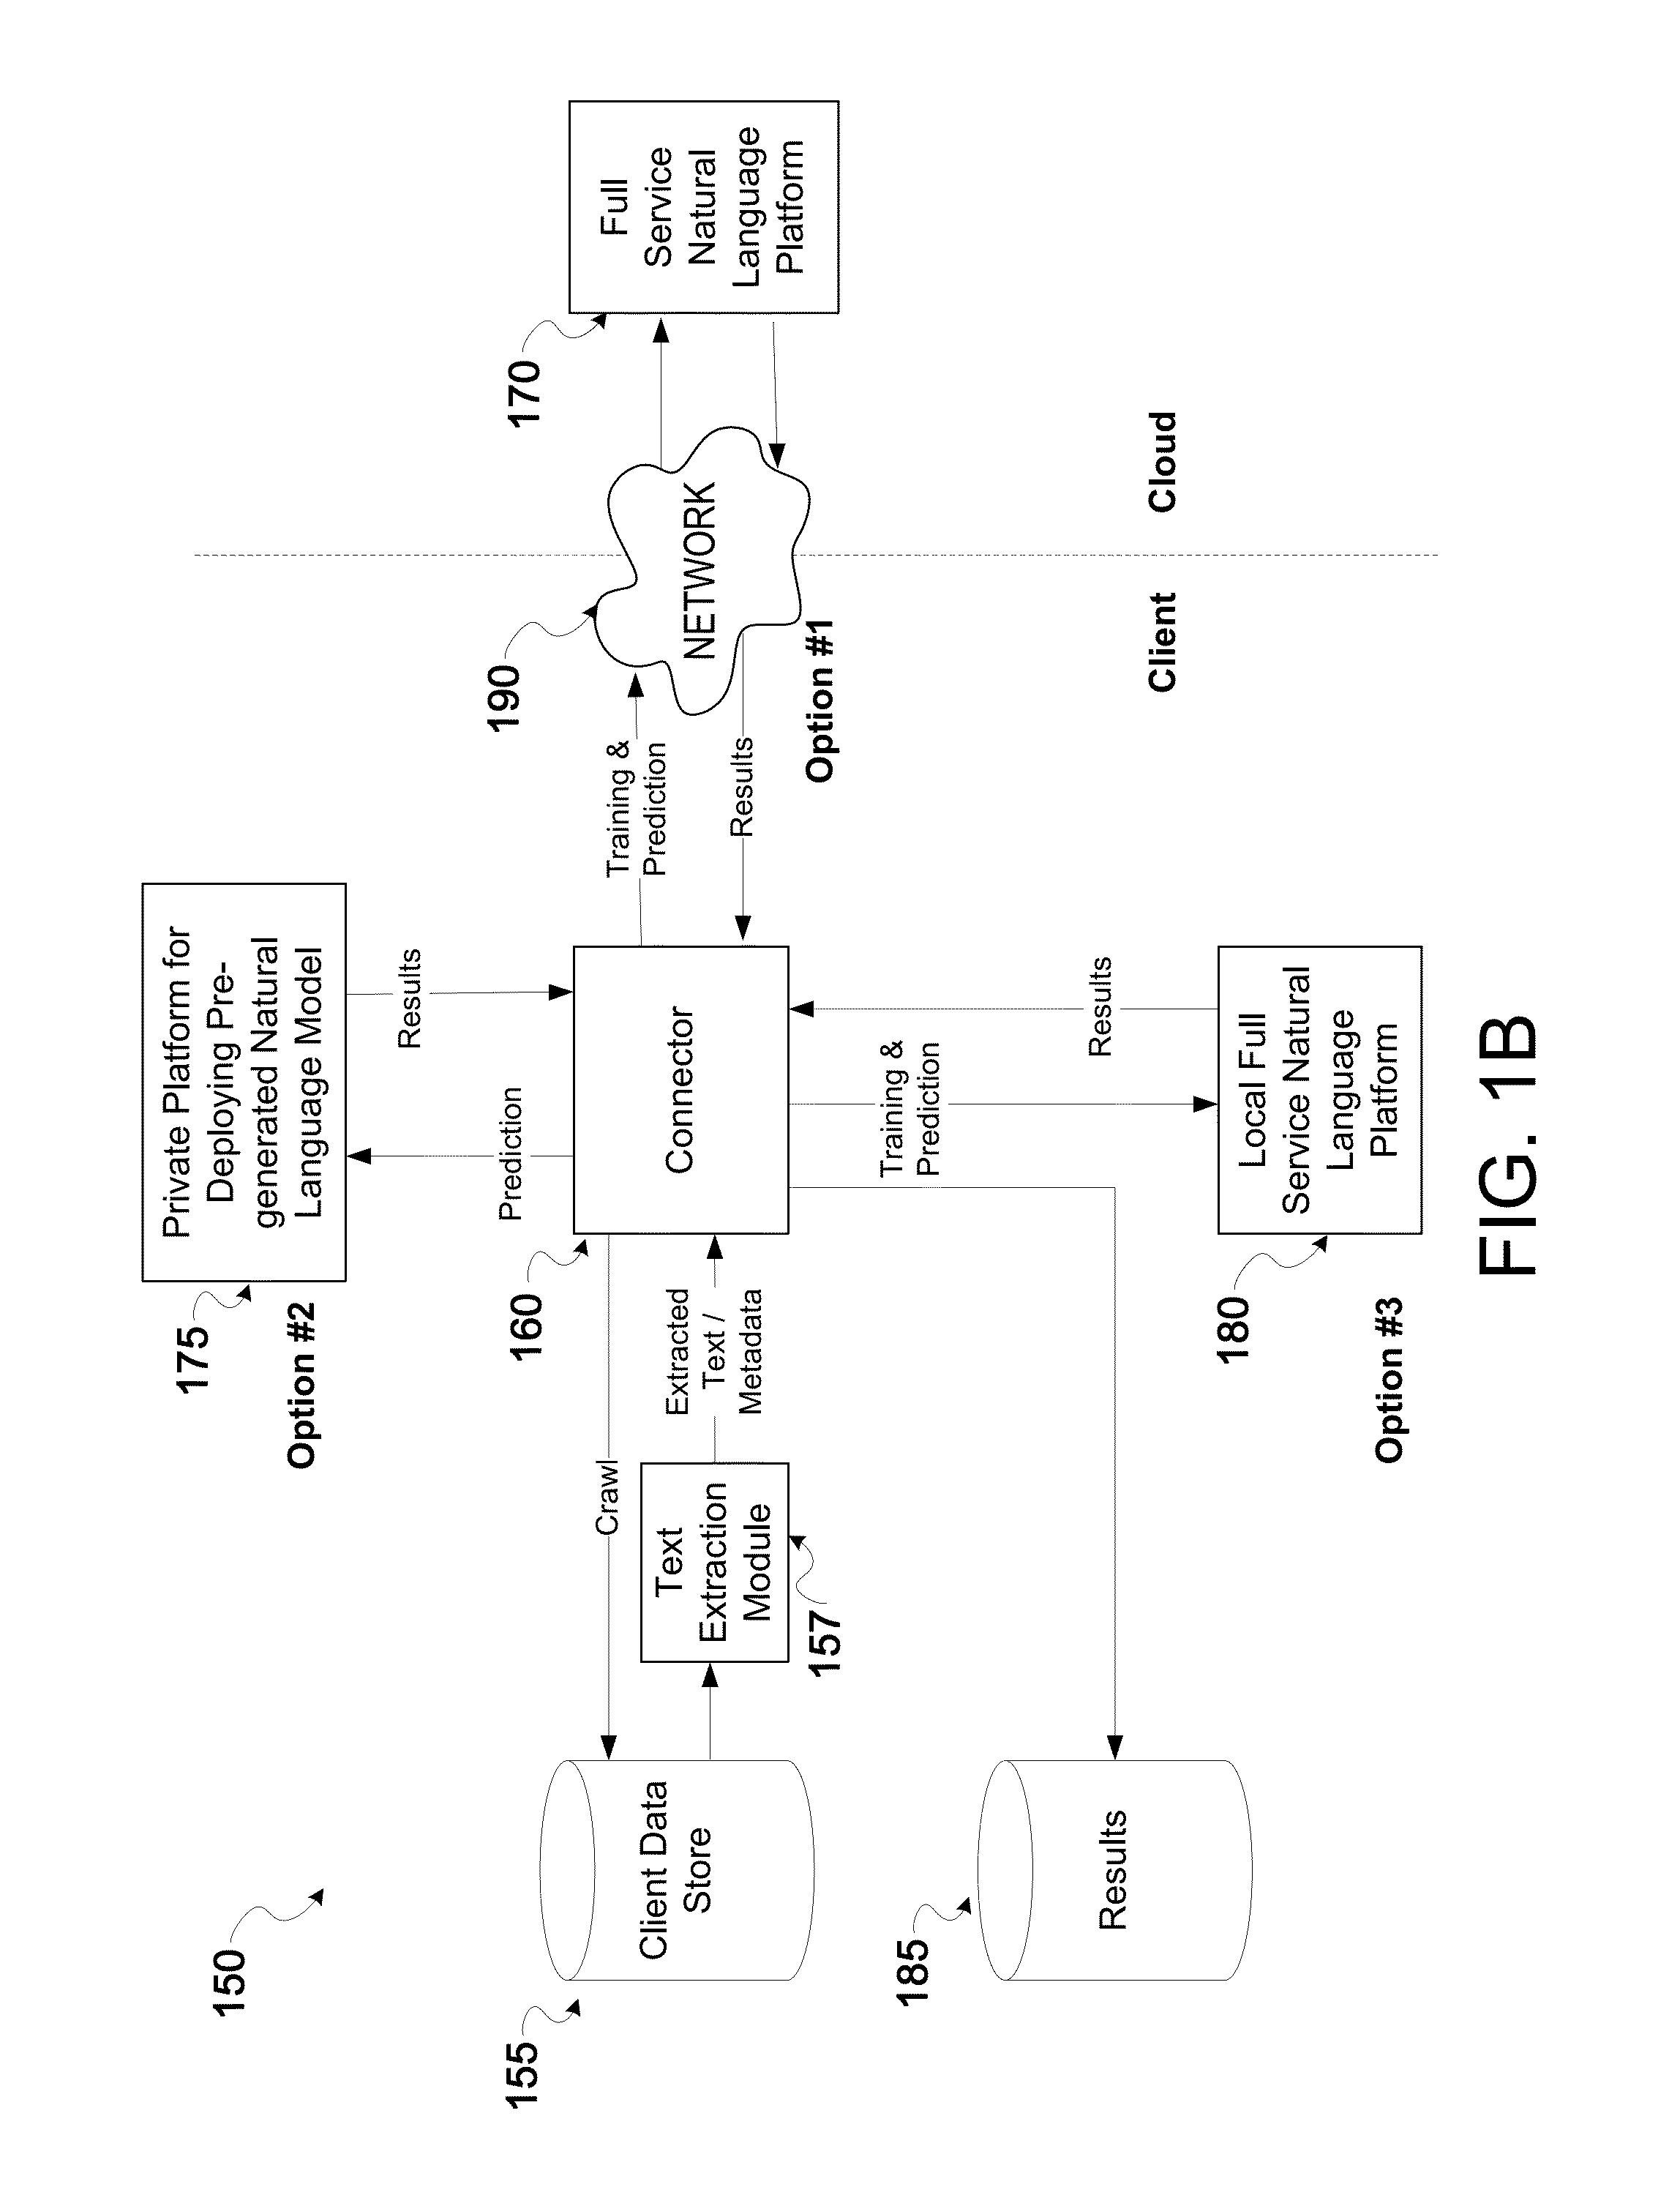 Methods for generating natural language processing systems